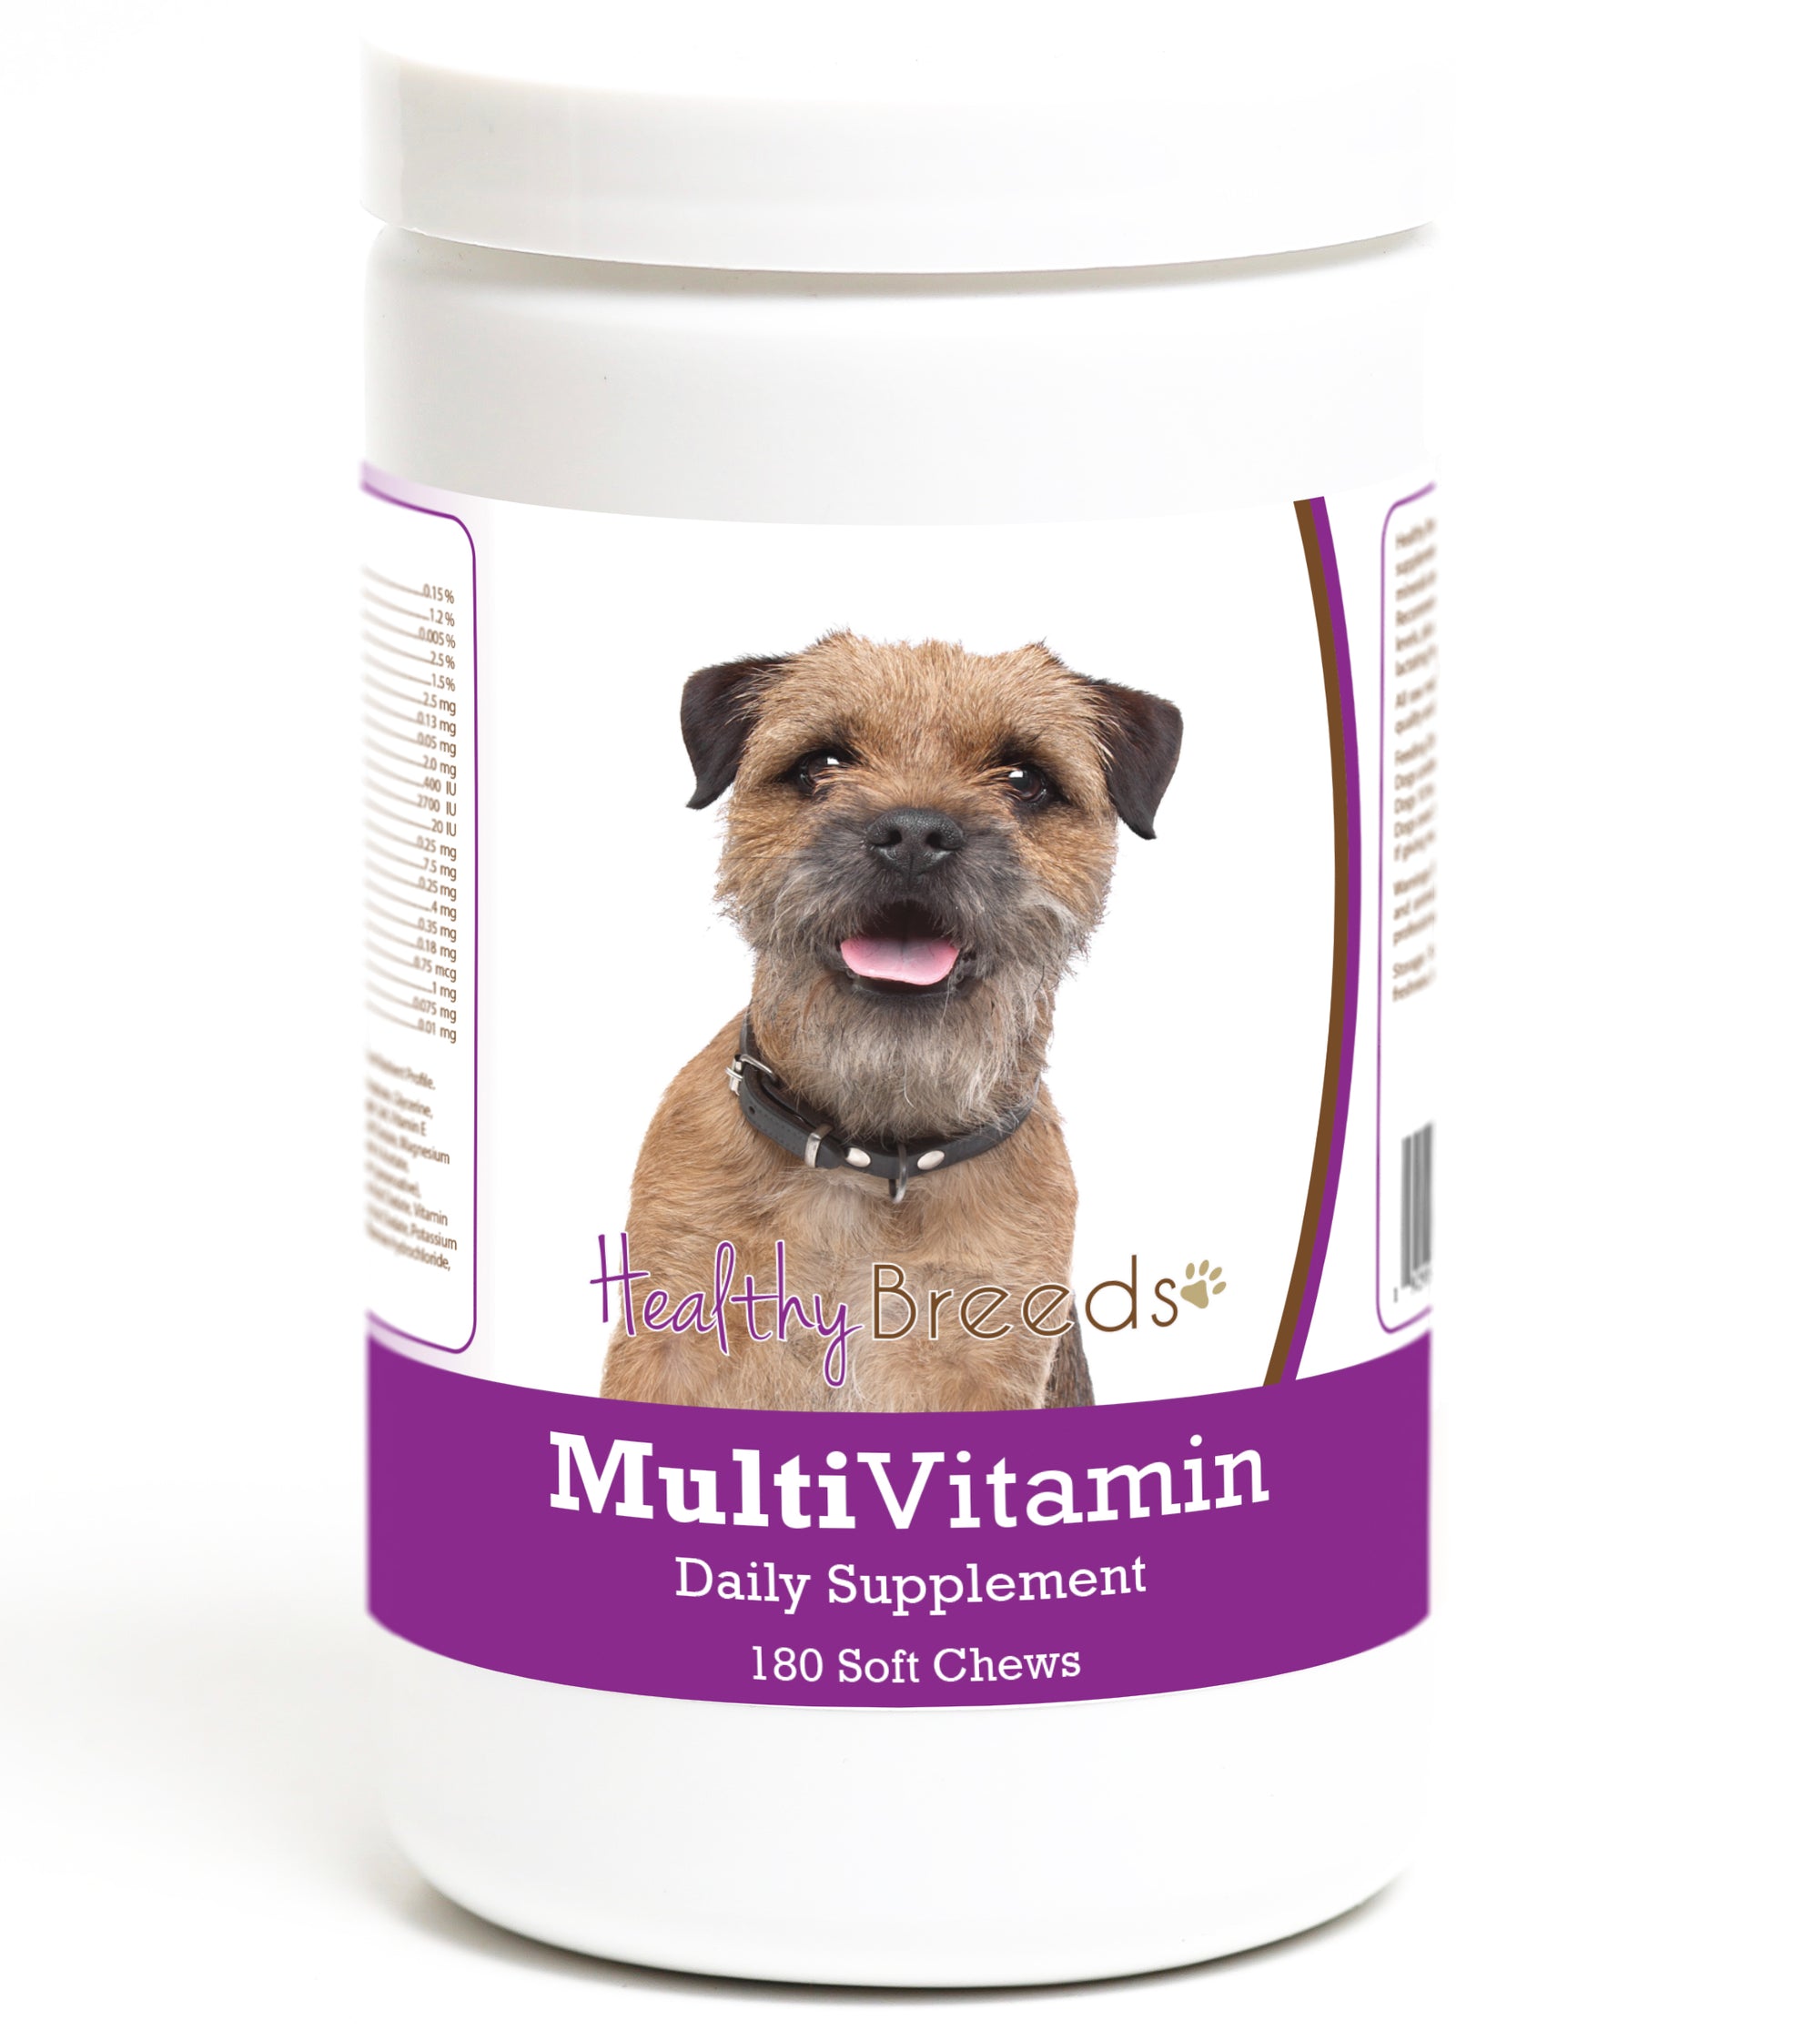 Healthy Breeds Border Terrier Multivitamin Soft Chew for Dogs 180 Count